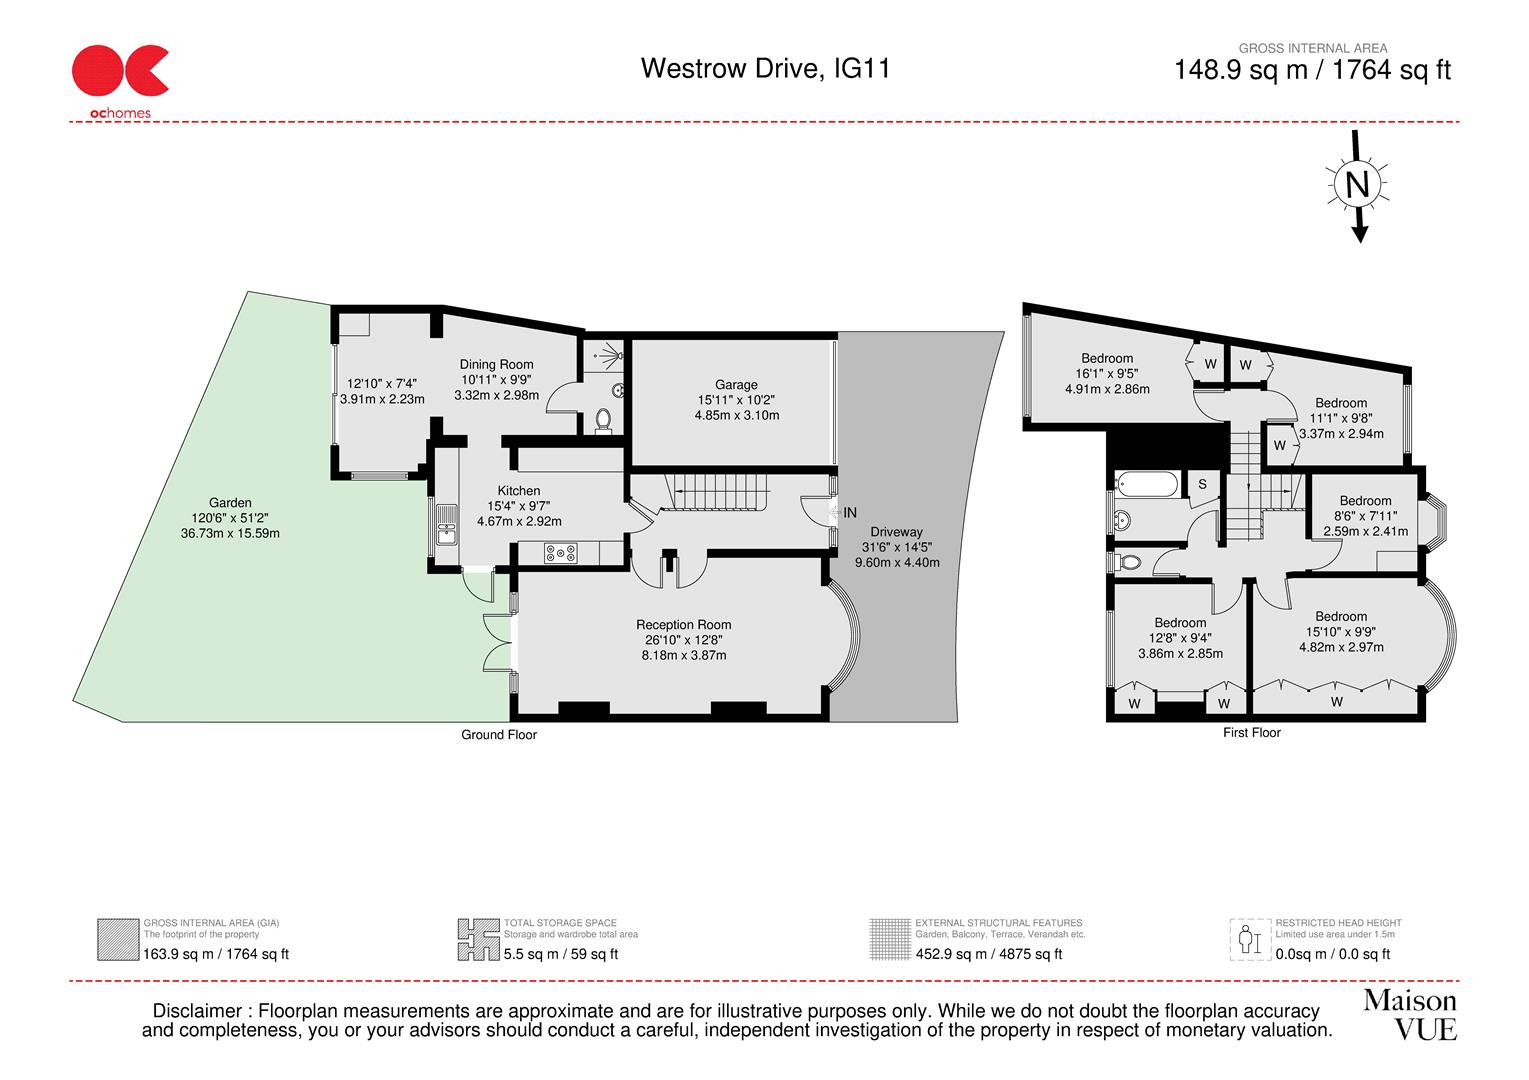 5 bed end of terrace house for sale in Westrow Drive, Barking - Property floorplan